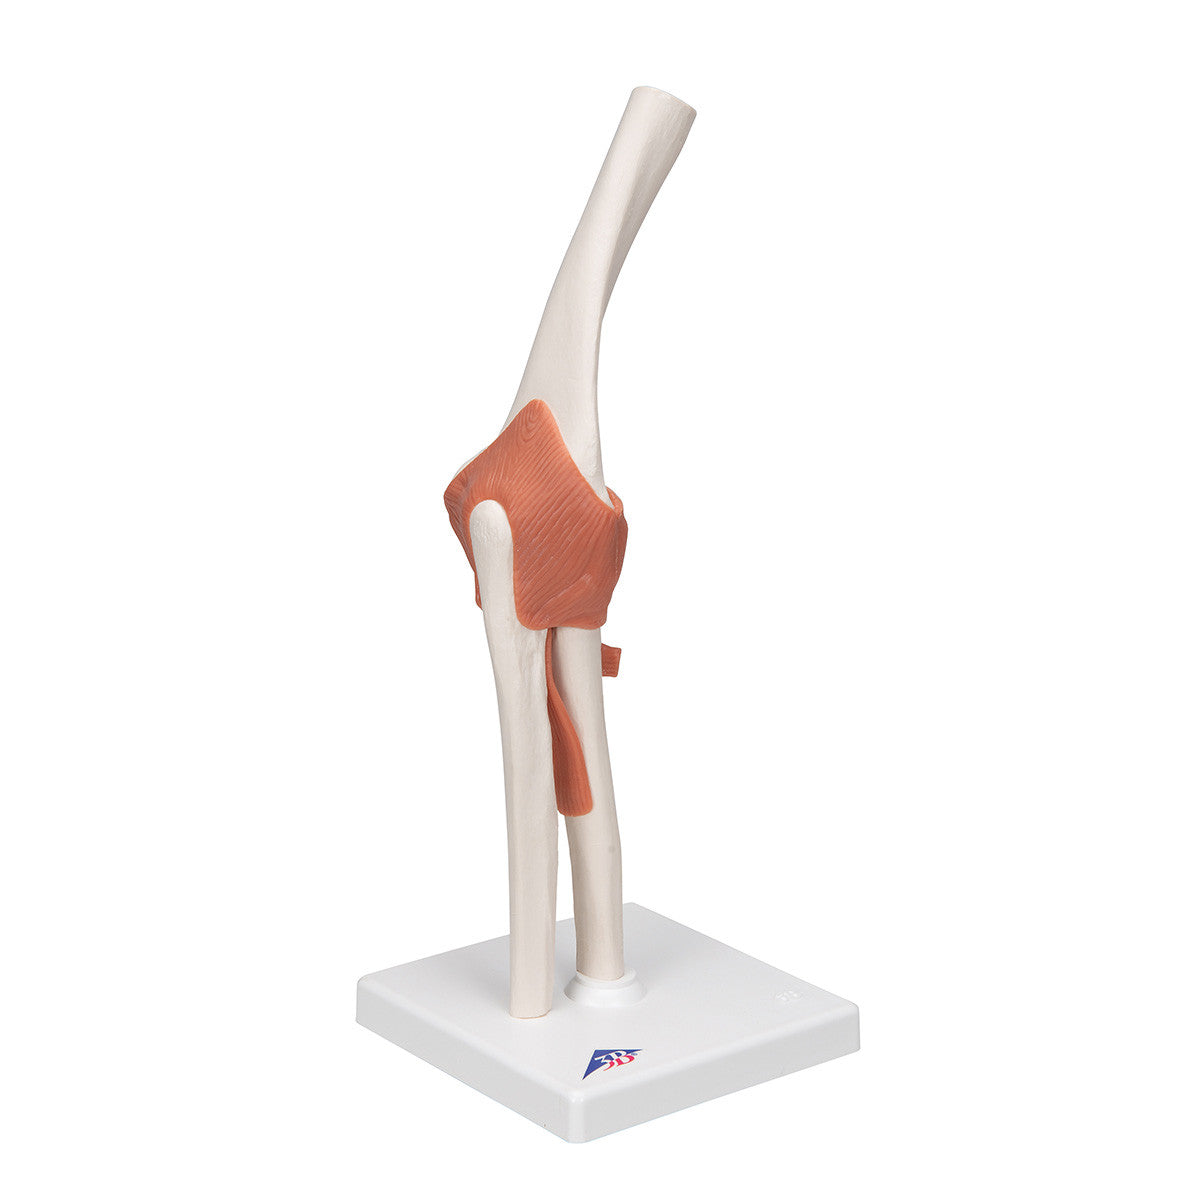 a83_02_1200_1200_functional-human-elbow-joint-model-with-ligaments-3b-smart-anatomy__54291.1589753046.1280.1280.jpg